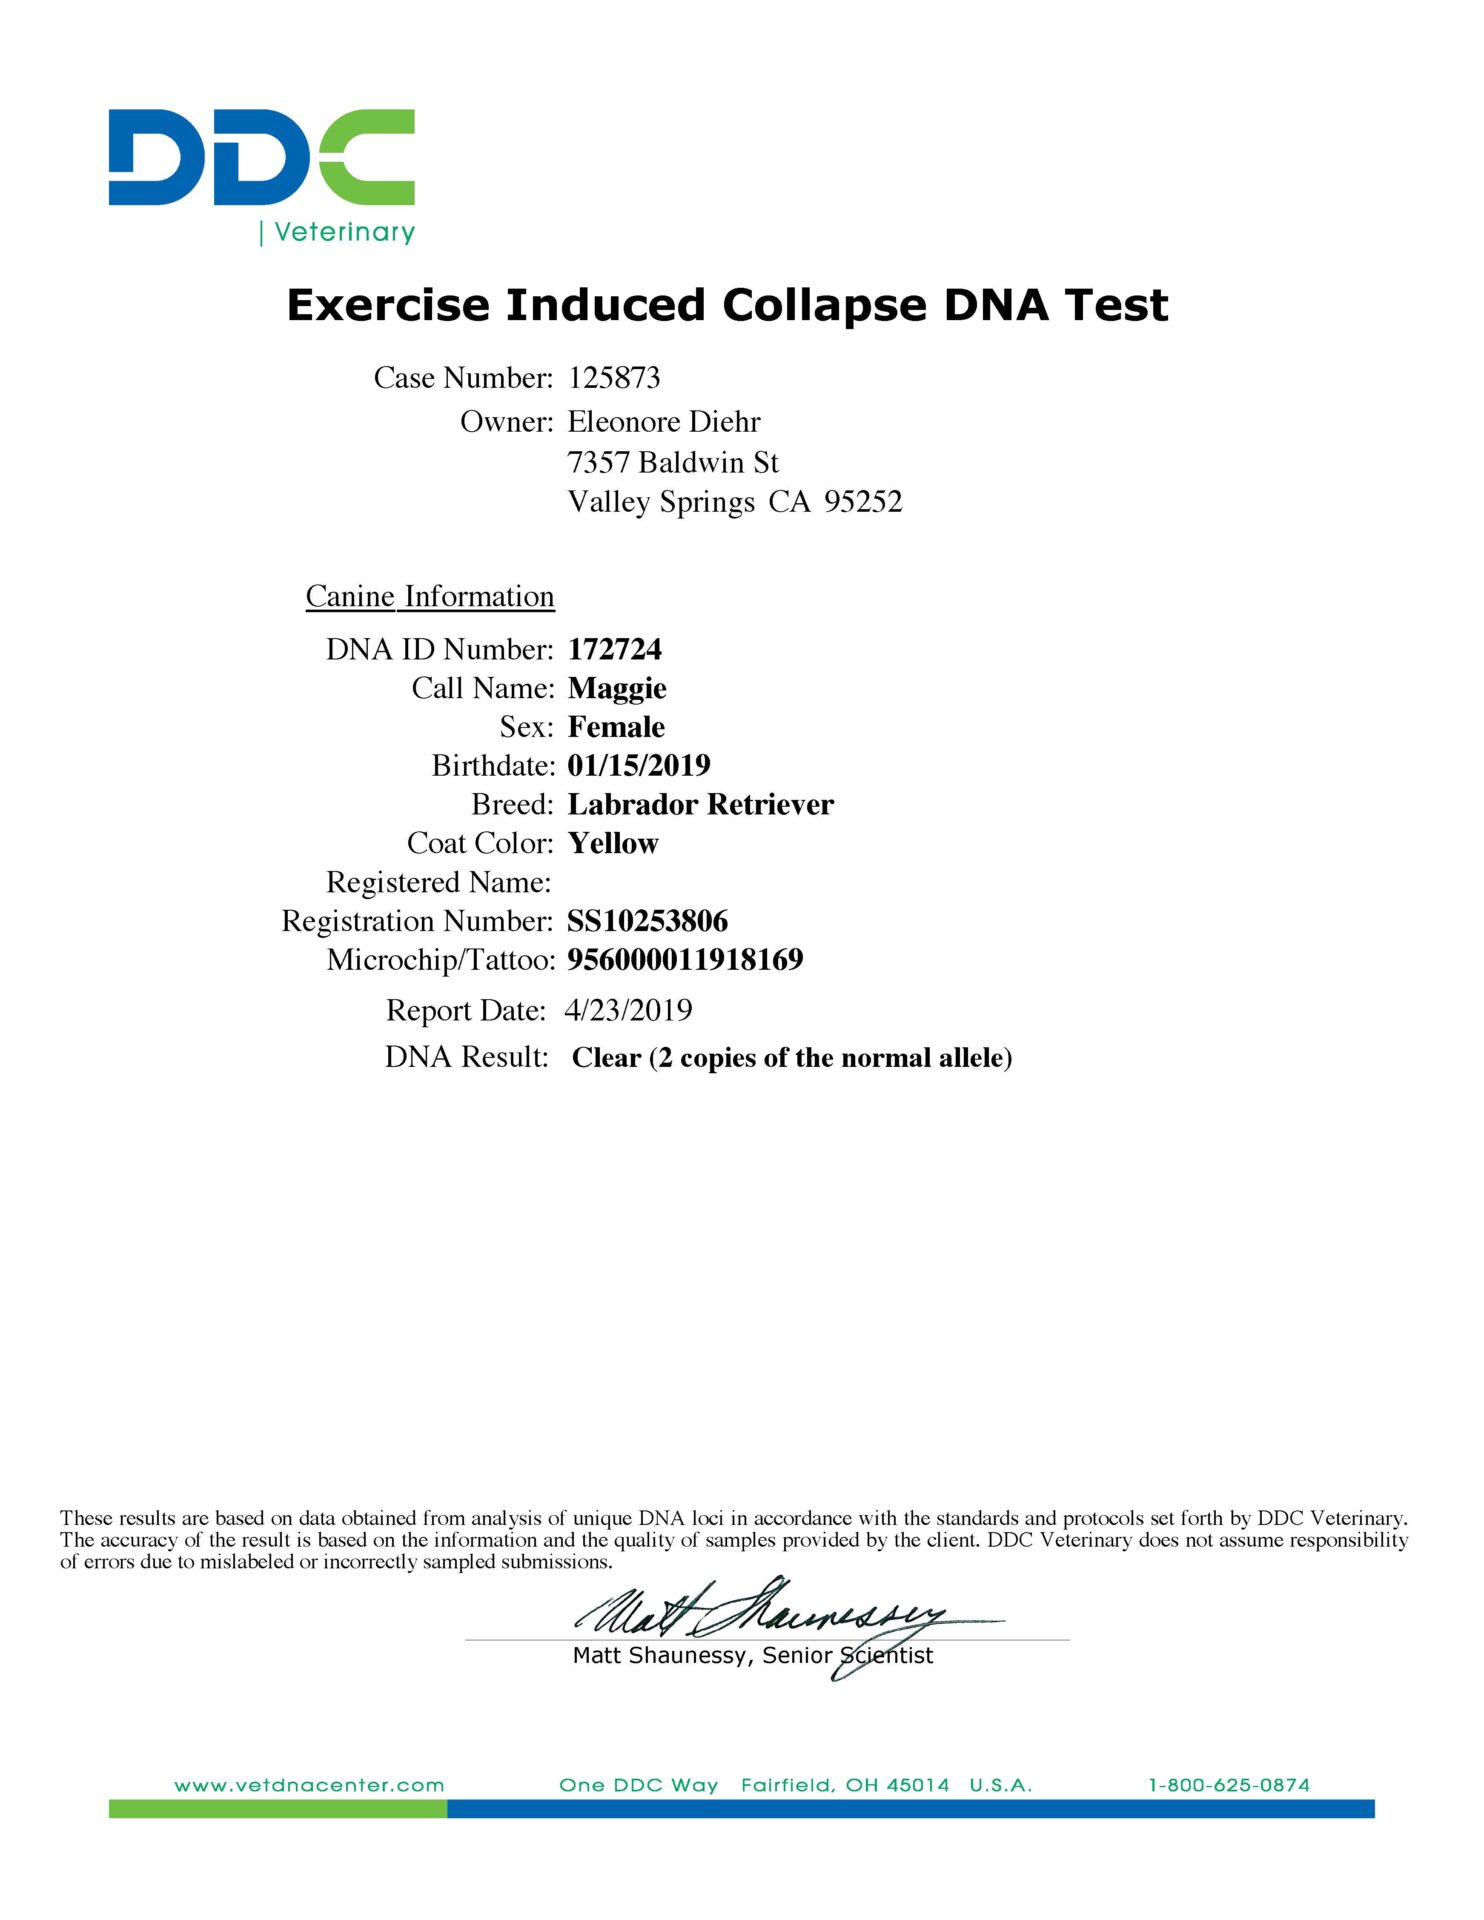 A sheet of paper with instructions for an exercise induced collapse dna test.